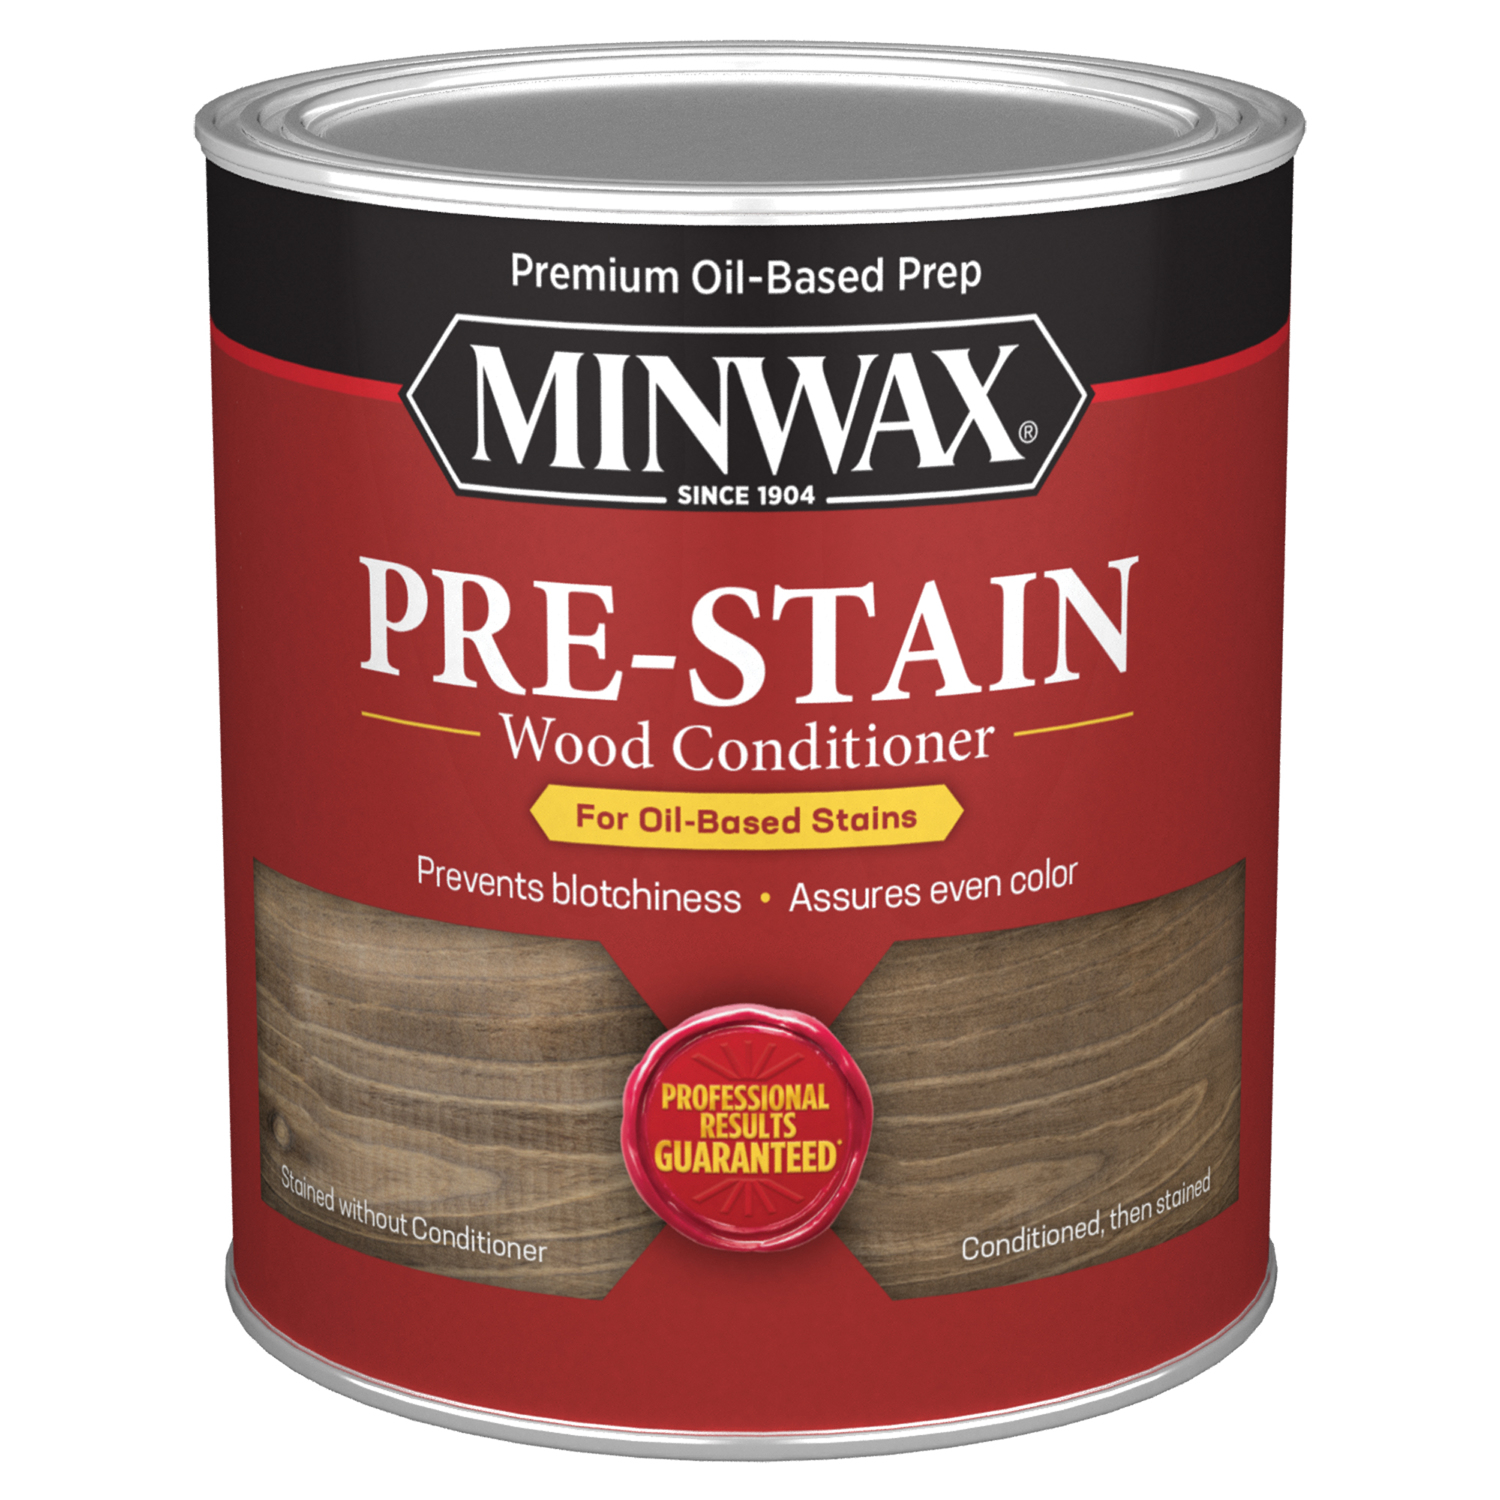 Minwax Pre-Stain Wood Conditioner Oil-Based Pre-Stain Wood Conditioner 1 qt